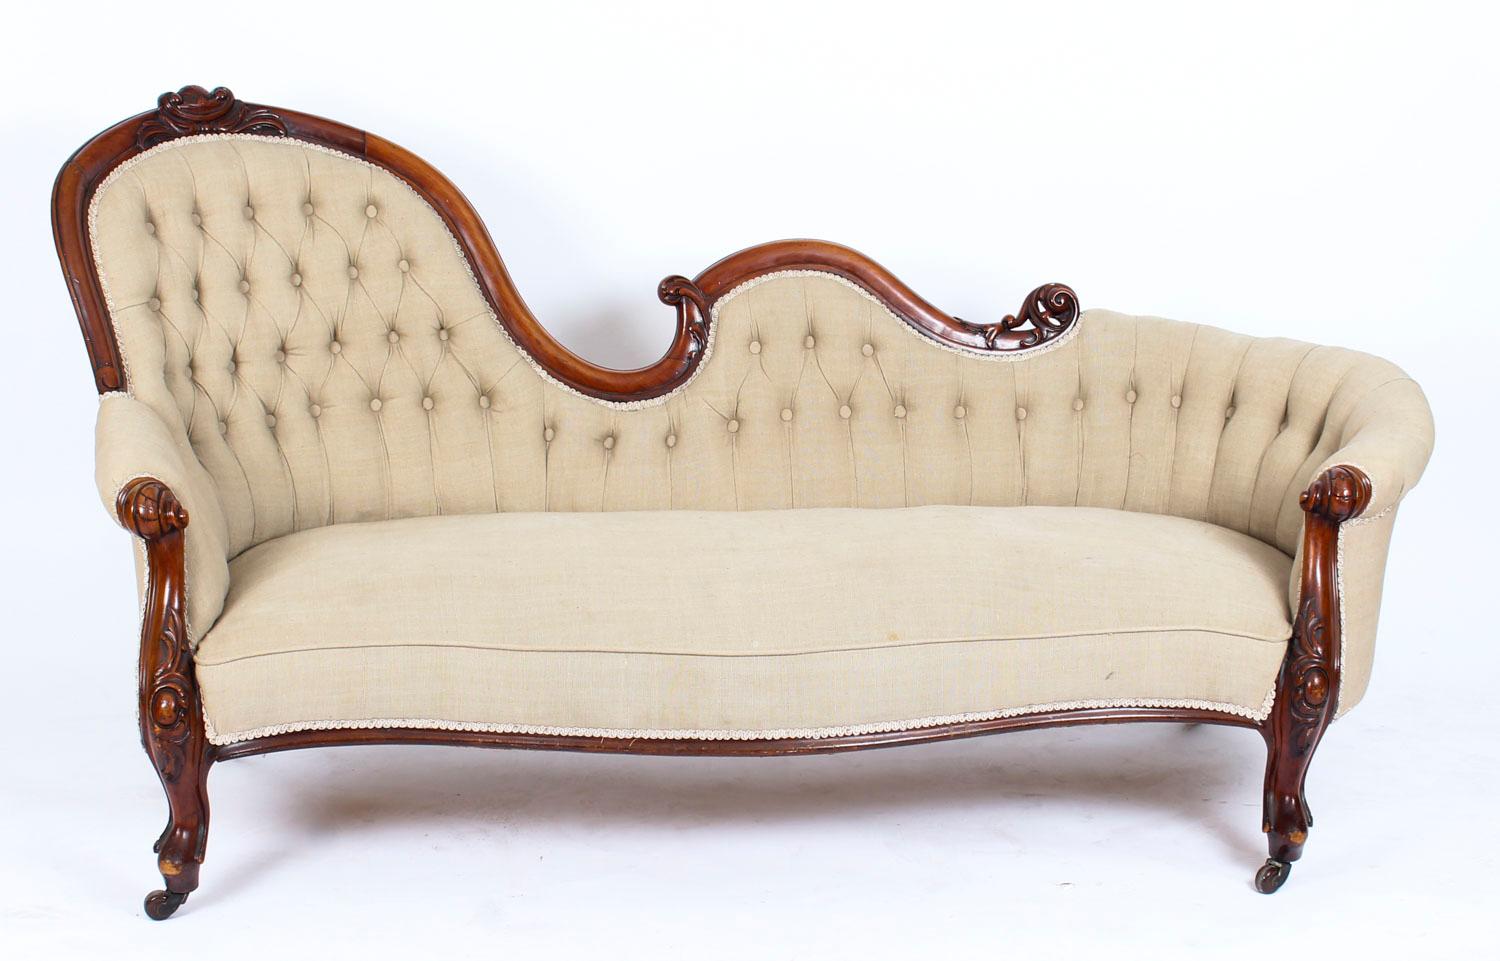 This is a gorgeous English antique Victorian chaise longue which dates from circa 1860.

This sofa was made from hand carved solid mahogany with an undulating and scrolled top-rail enclosing deep-button upholstered back and sides above a serpentine